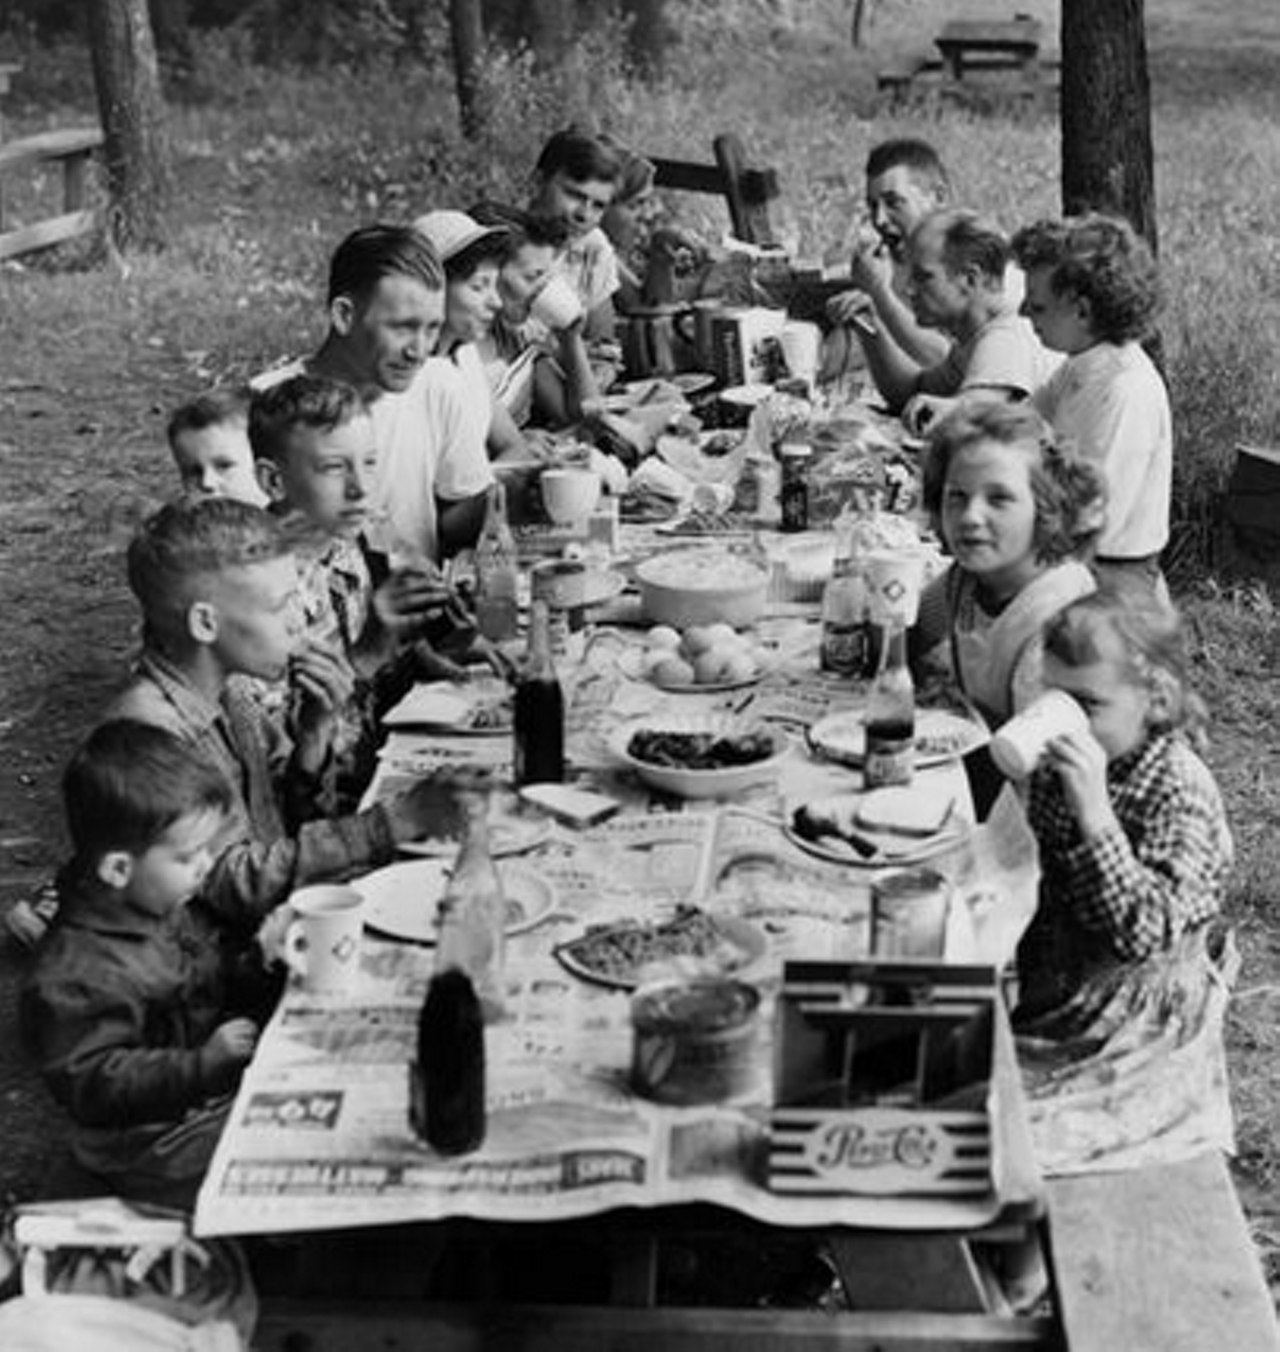 Picnicking in North Chagrin Reservation, 1953